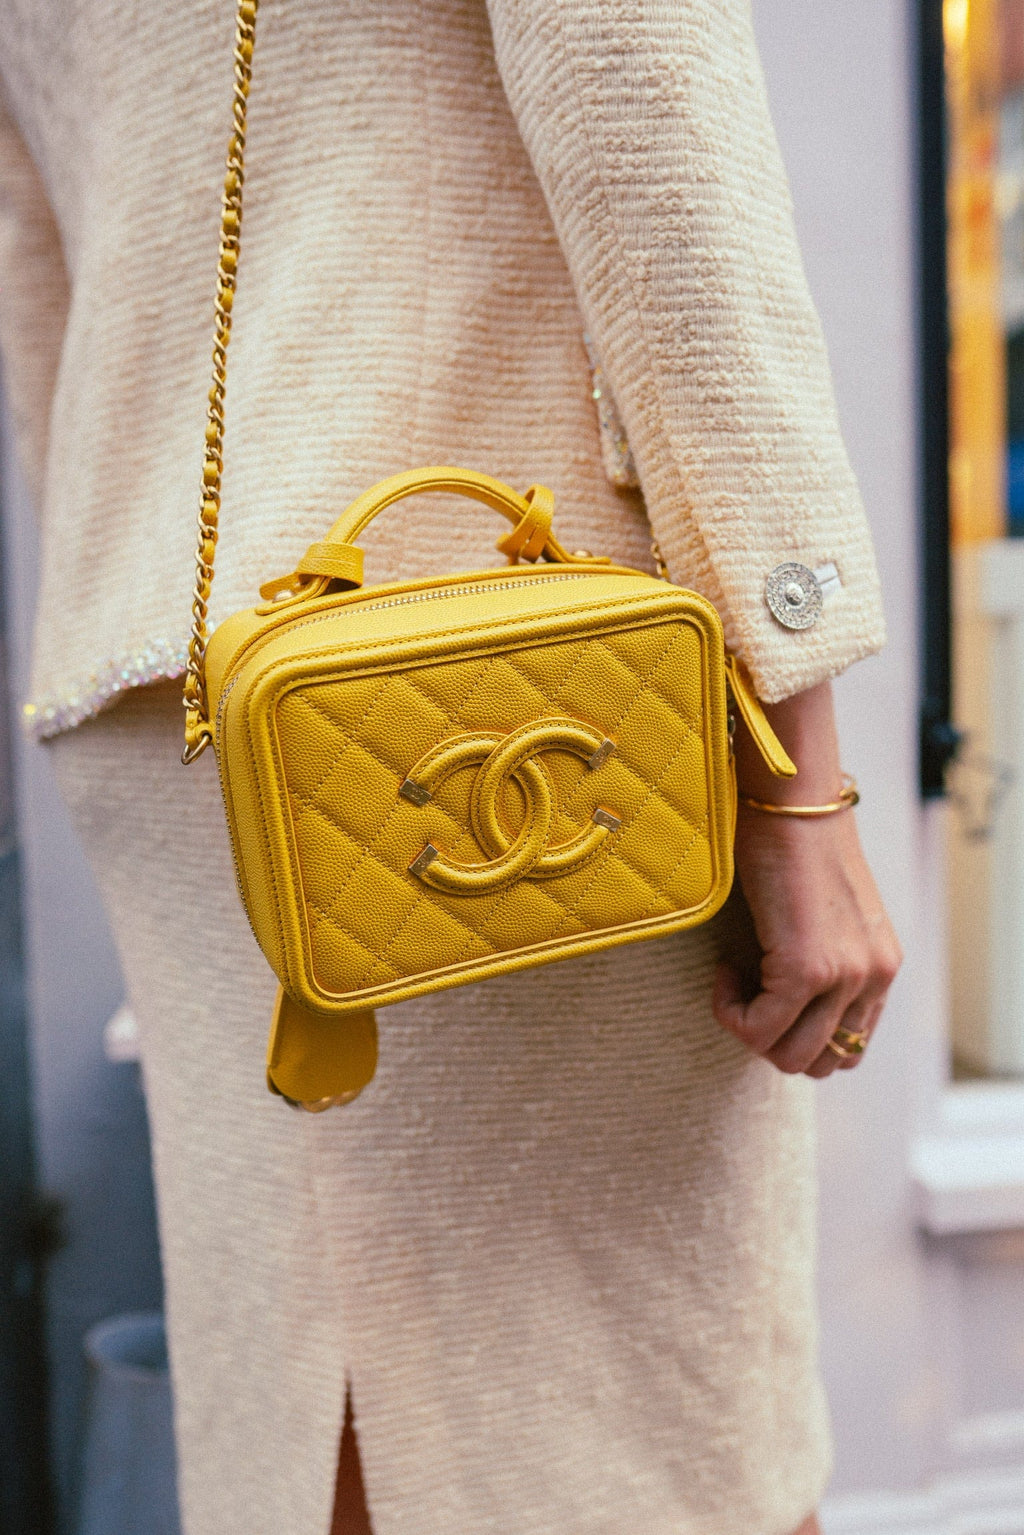 Chanel AP2198B06660 Small Vanity Case Yellow / NG754 Calfskin Shoulder Bags GHW